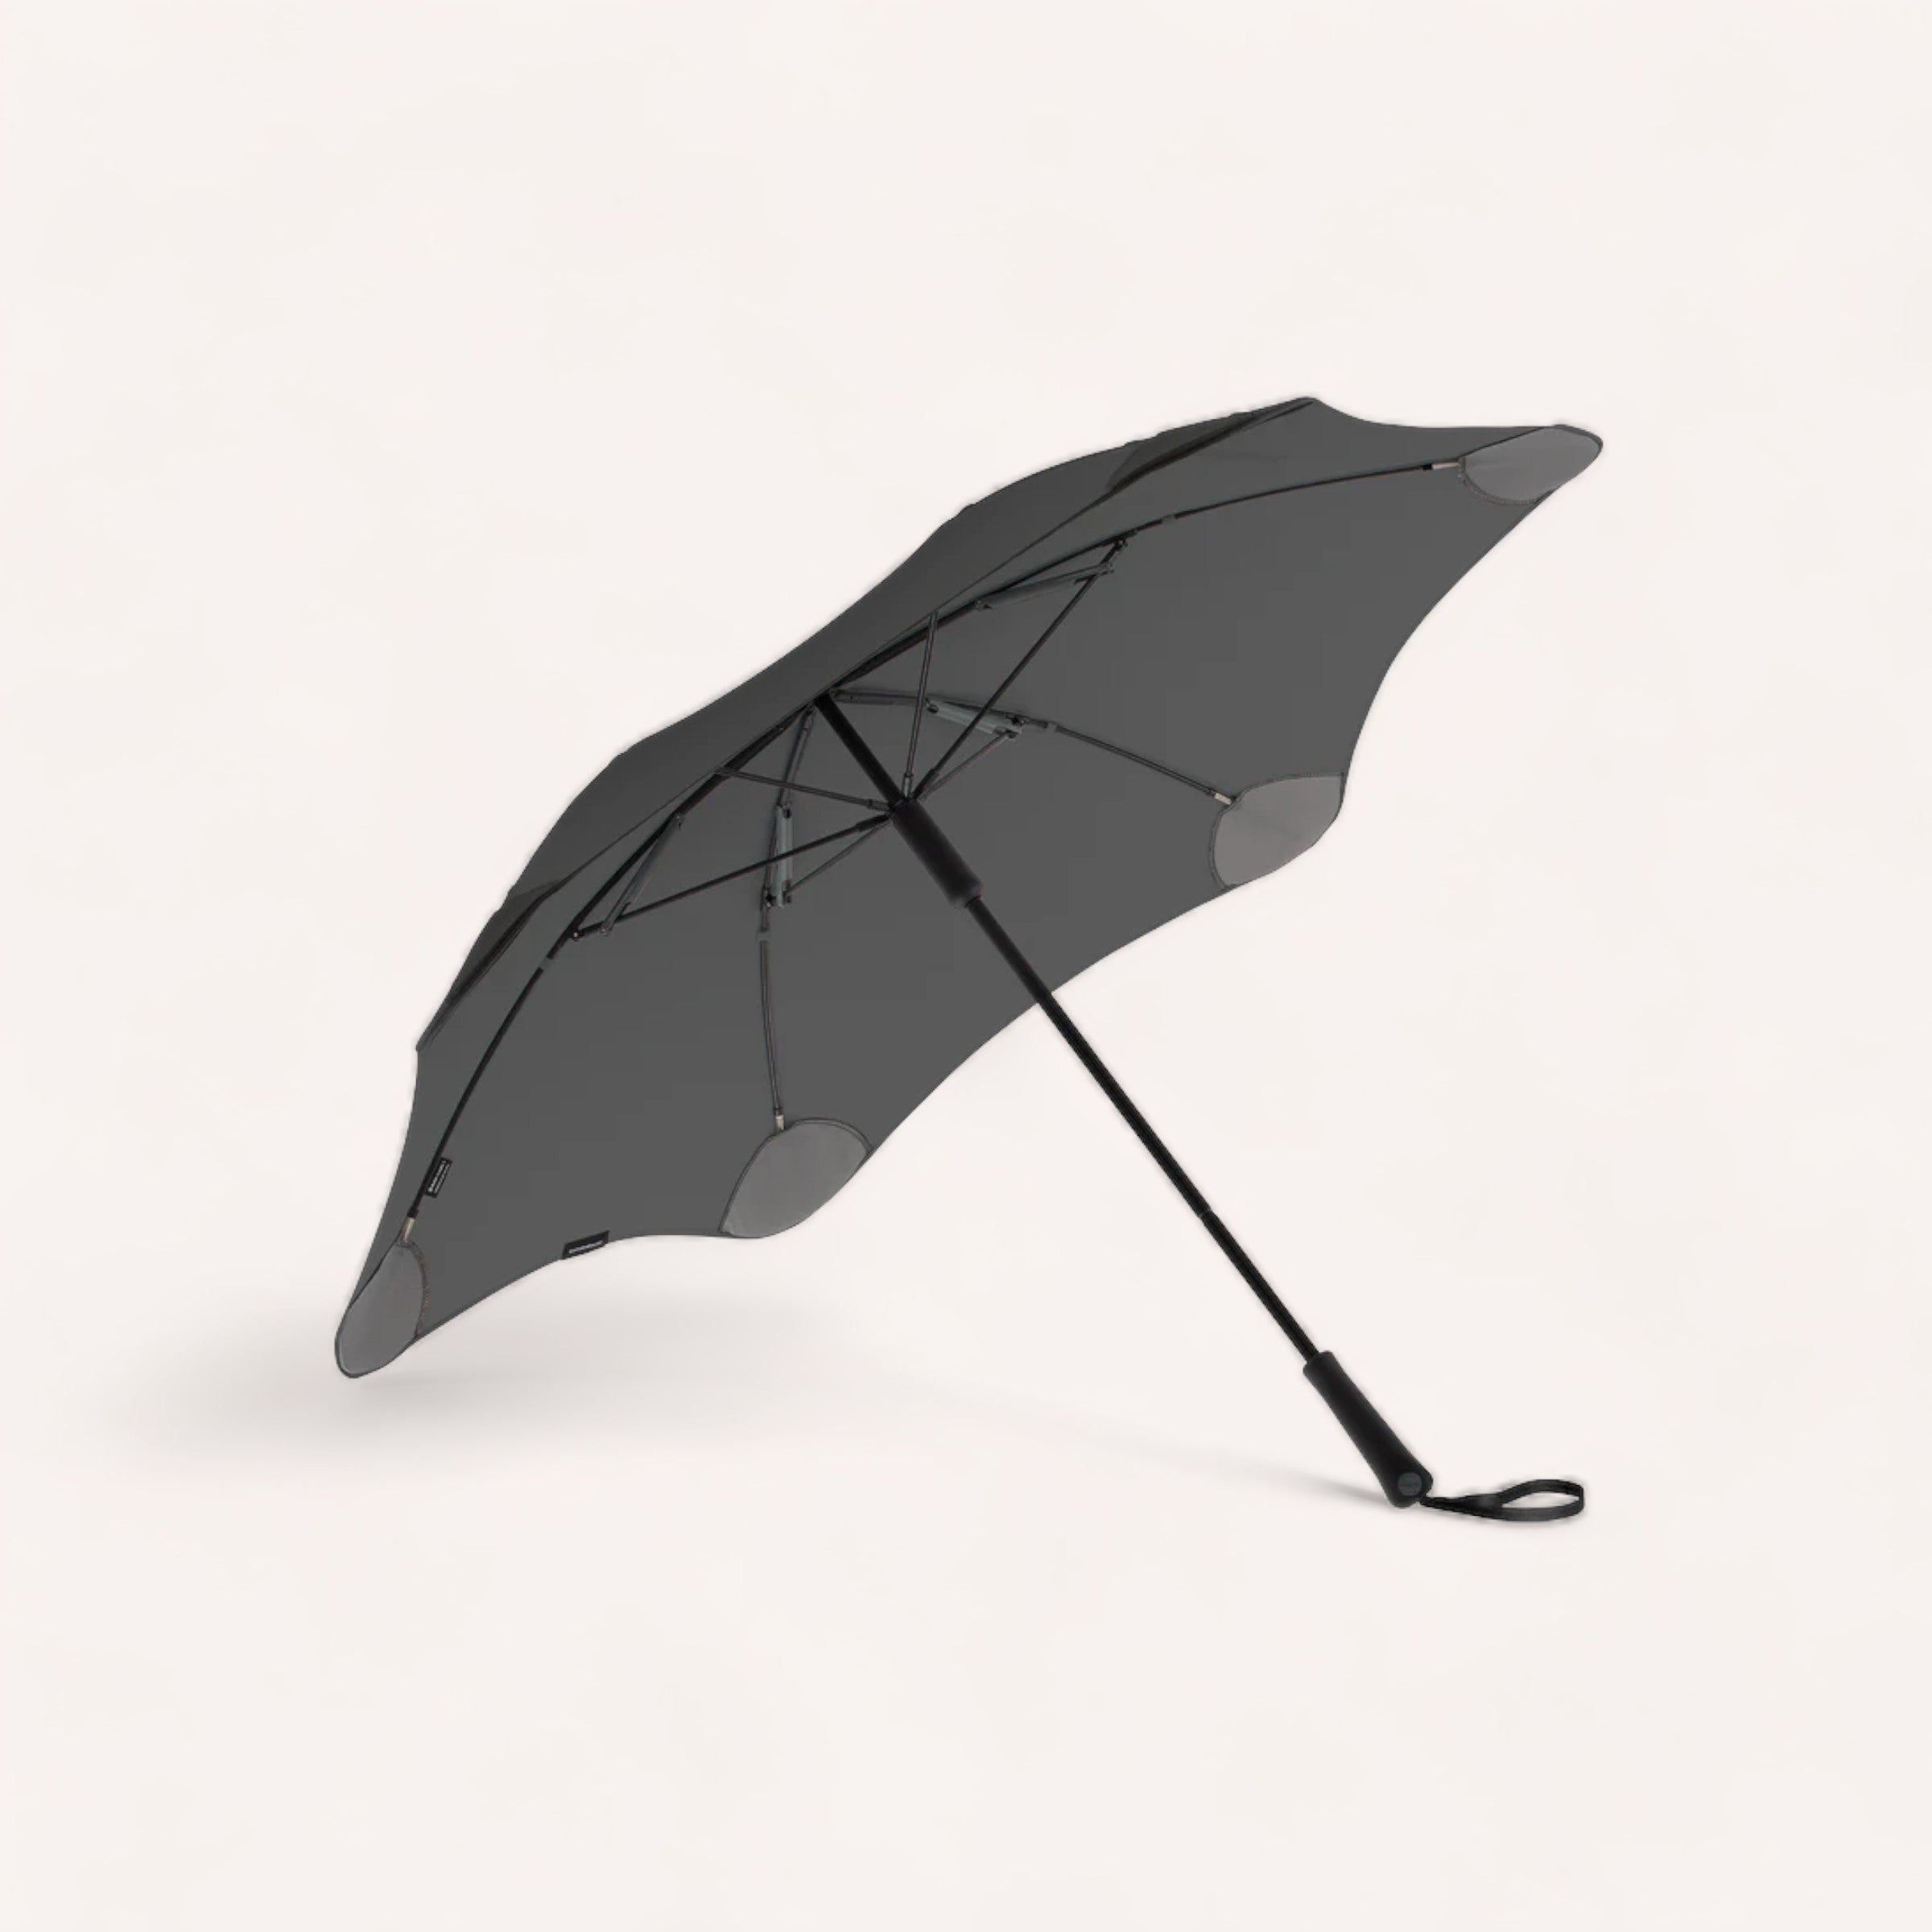 A black BLUNT classic compact umbrella opened and lying on its side against a white background.